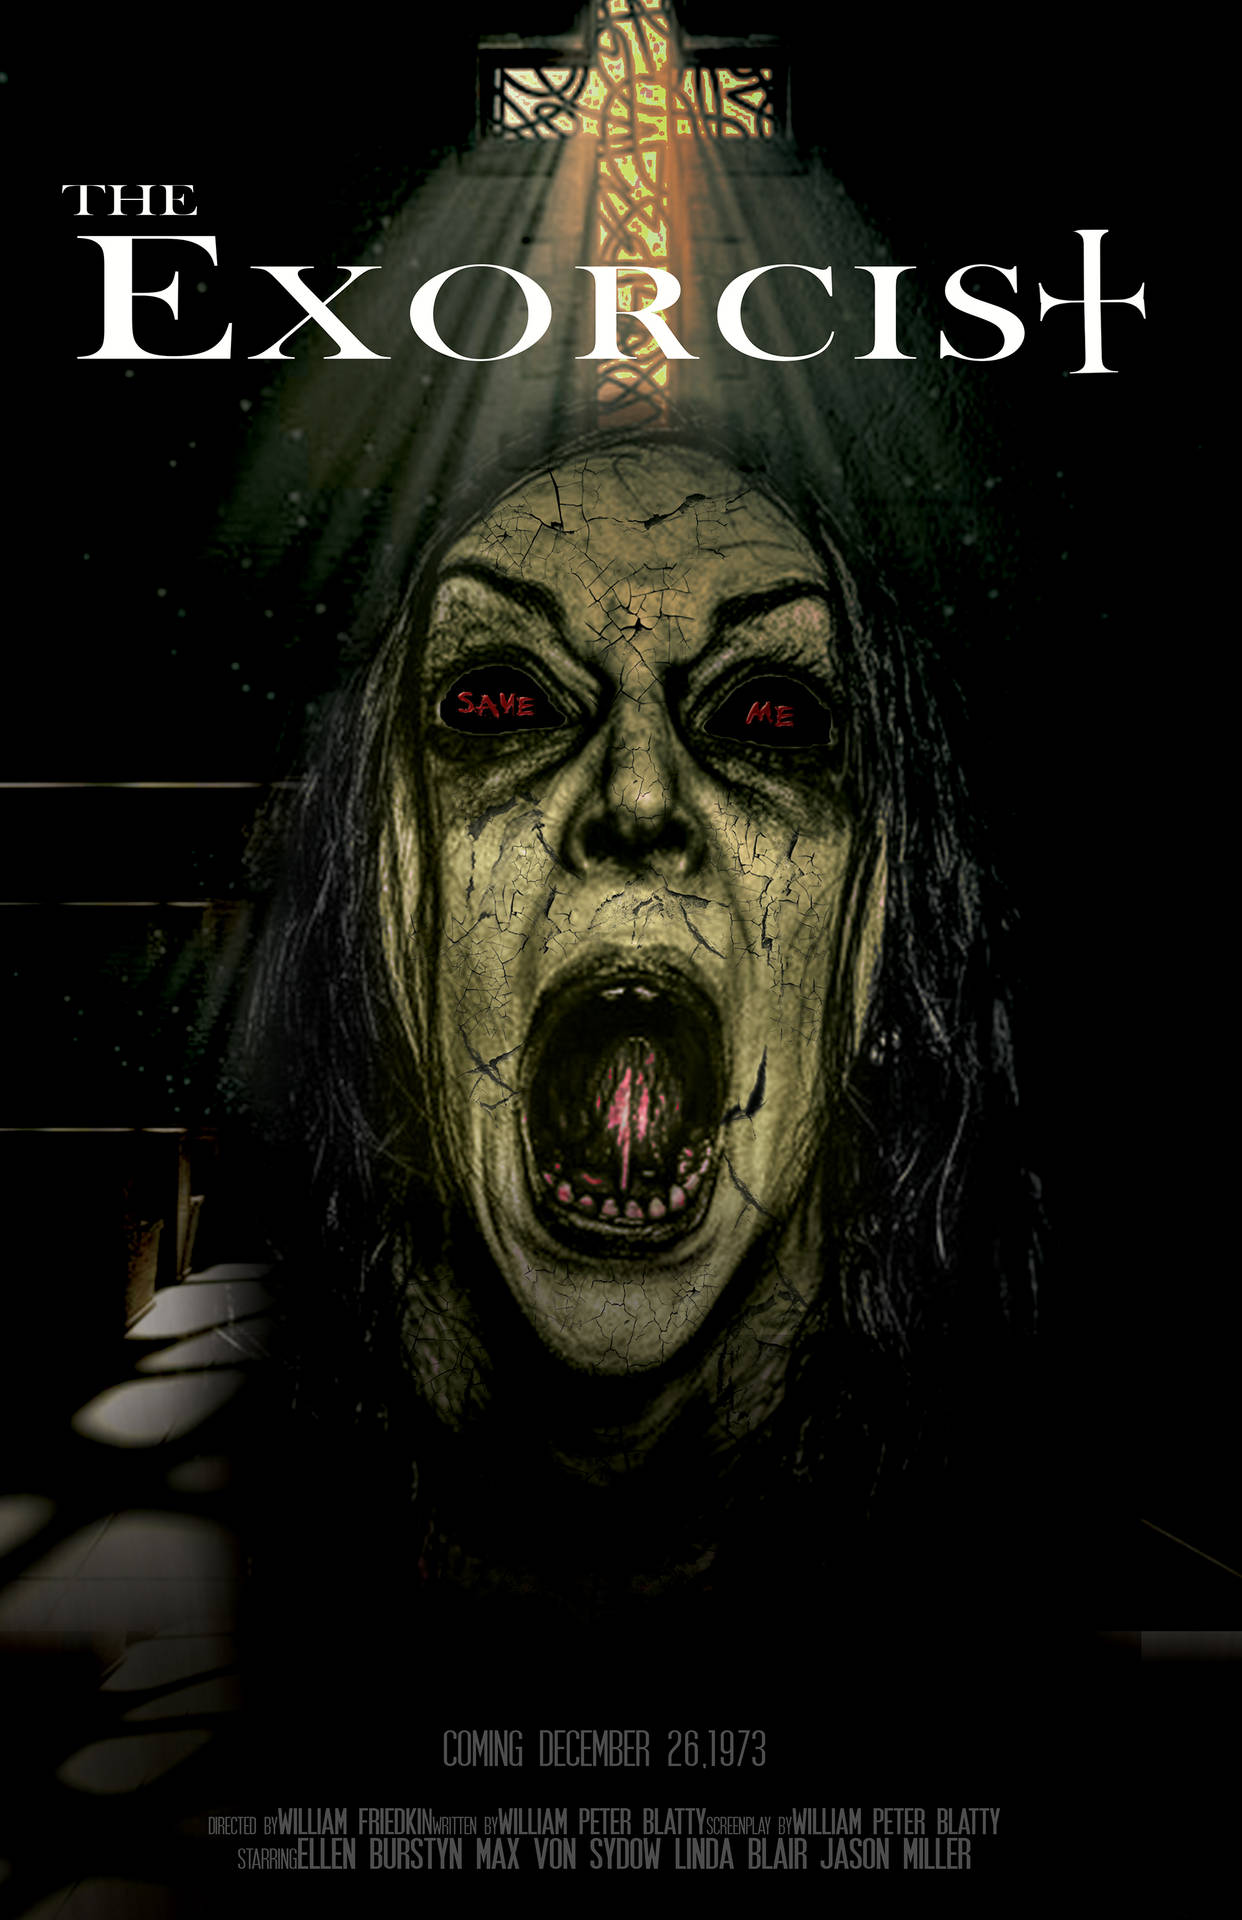 The Exorcist Evil Woman Background